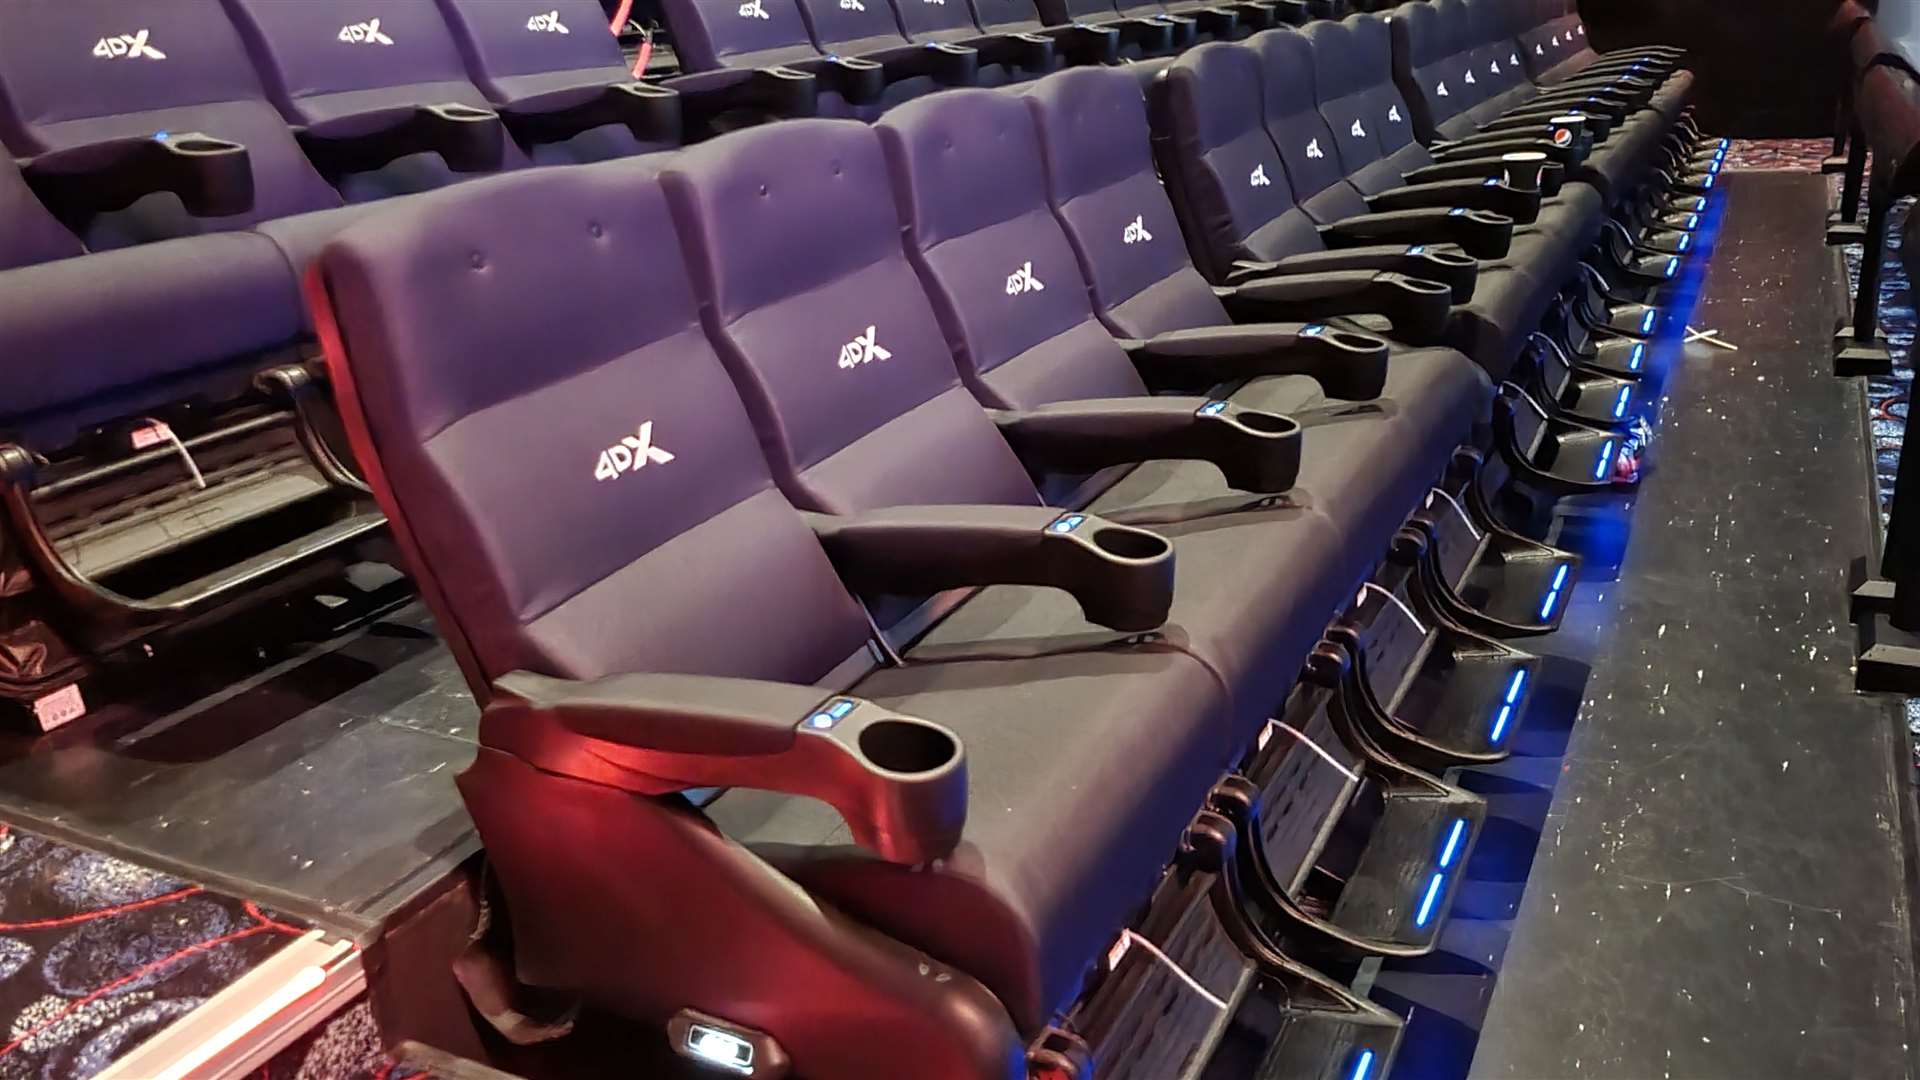 How the new seats look in the 4DX screen